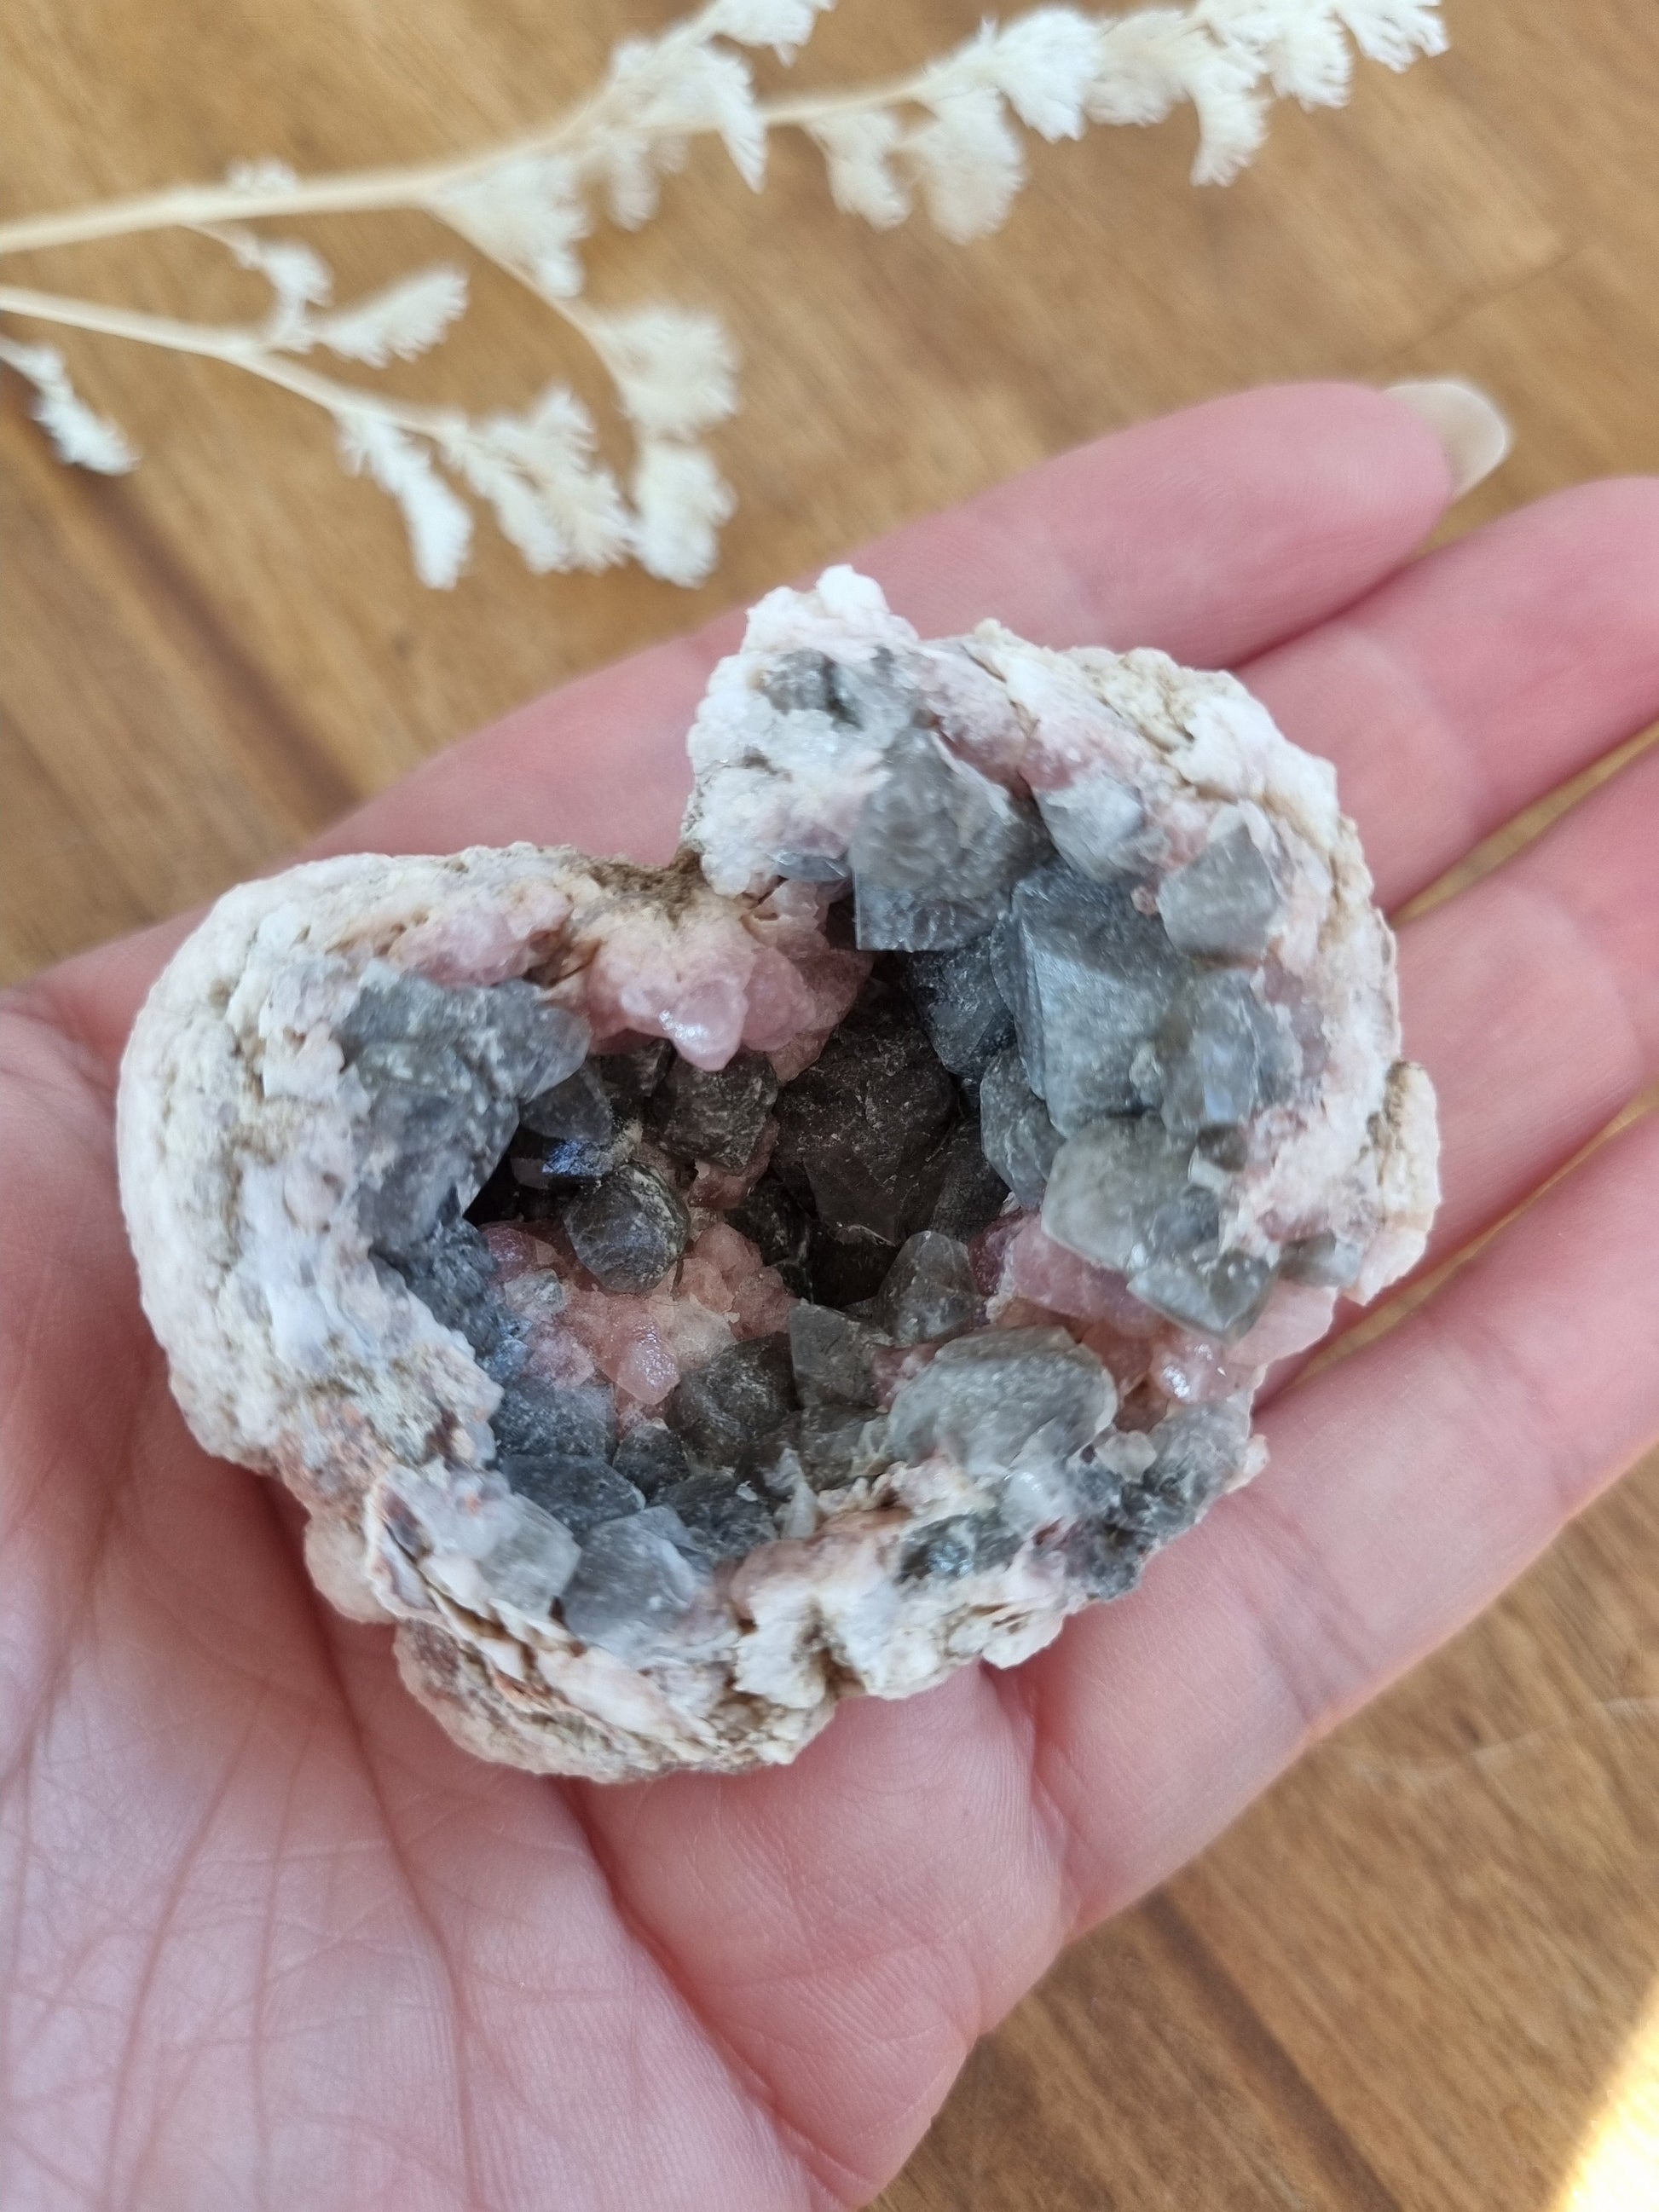 Pink Amythest Geode With Lots Of Analcime - Universal Fate